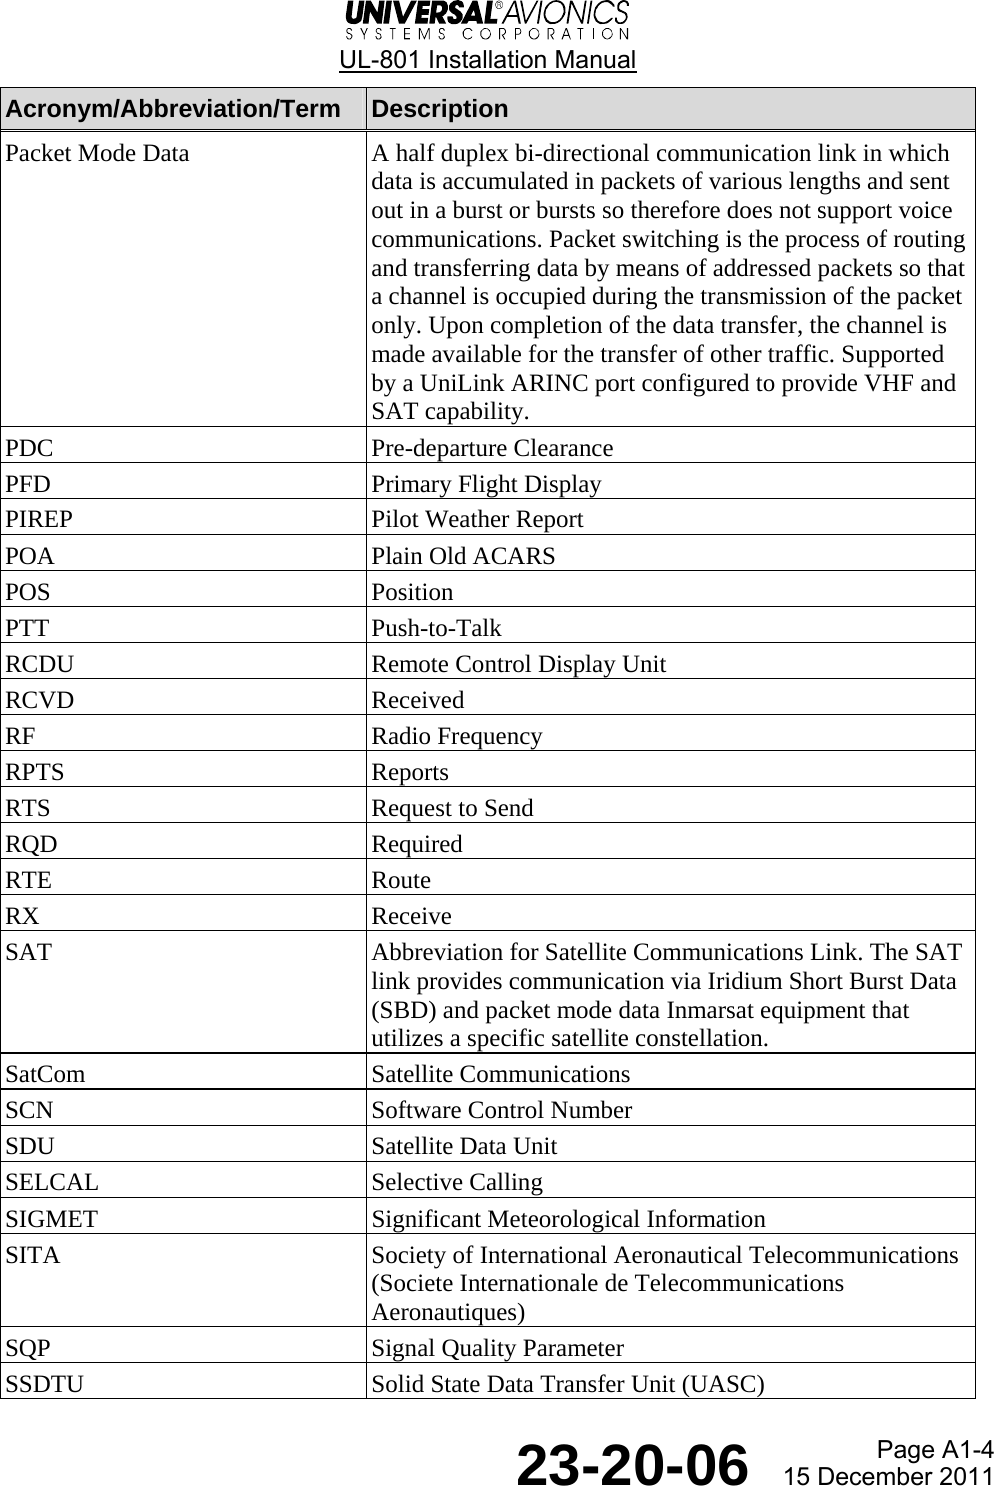  UL-801 Installation Manual  Page A1-4  23-20-06  15 December 2011 Acronym/Abbreviation/Term  Description Packet Mode Data  A half duplex bi-directional communication link in which data is accumulated in packets of various lengths and sent out in a burst or bursts so therefore does not support voice communications. Packet switching is the process of routing and transferring data by means of addressed packets so that a channel is occupied during the transmission of the packet only. Upon completion of the data transfer, the channel is made available for the transfer of other traffic. Supported by a UniLink ARINC port configured to provide VHF and SAT capability. PDC Pre-departure Clearance PFD  Primary Flight Display PIREP  Pilot Weather Report POA  Plain Old ACARS POS Position PTT Push-to-Talk RCDU  Remote Control Display Unit RCVD Received RF Radio Frequency RPTS Reports RTS  Request to Send RQD Required RTE Route RX Receive SAT  Abbreviation for Satellite Communications Link. The SAT link provides communication via Iridium Short Burst Data (SBD) and packet mode data Inmarsat equipment that utilizes a specific satellite constellation. SatCom Satellite Communications SCN  Software Control Number SDU  Satellite Data Unit SELCAL Selective Calling SIGMET Significant Meteorological Information SITA  Society of International Aeronautical Telecommunications (Societe Internationale de Telecommunications Aeronautiques) SQP  Signal Quality Parameter SSDTU  Solid State Data Transfer Unit (UASC) 